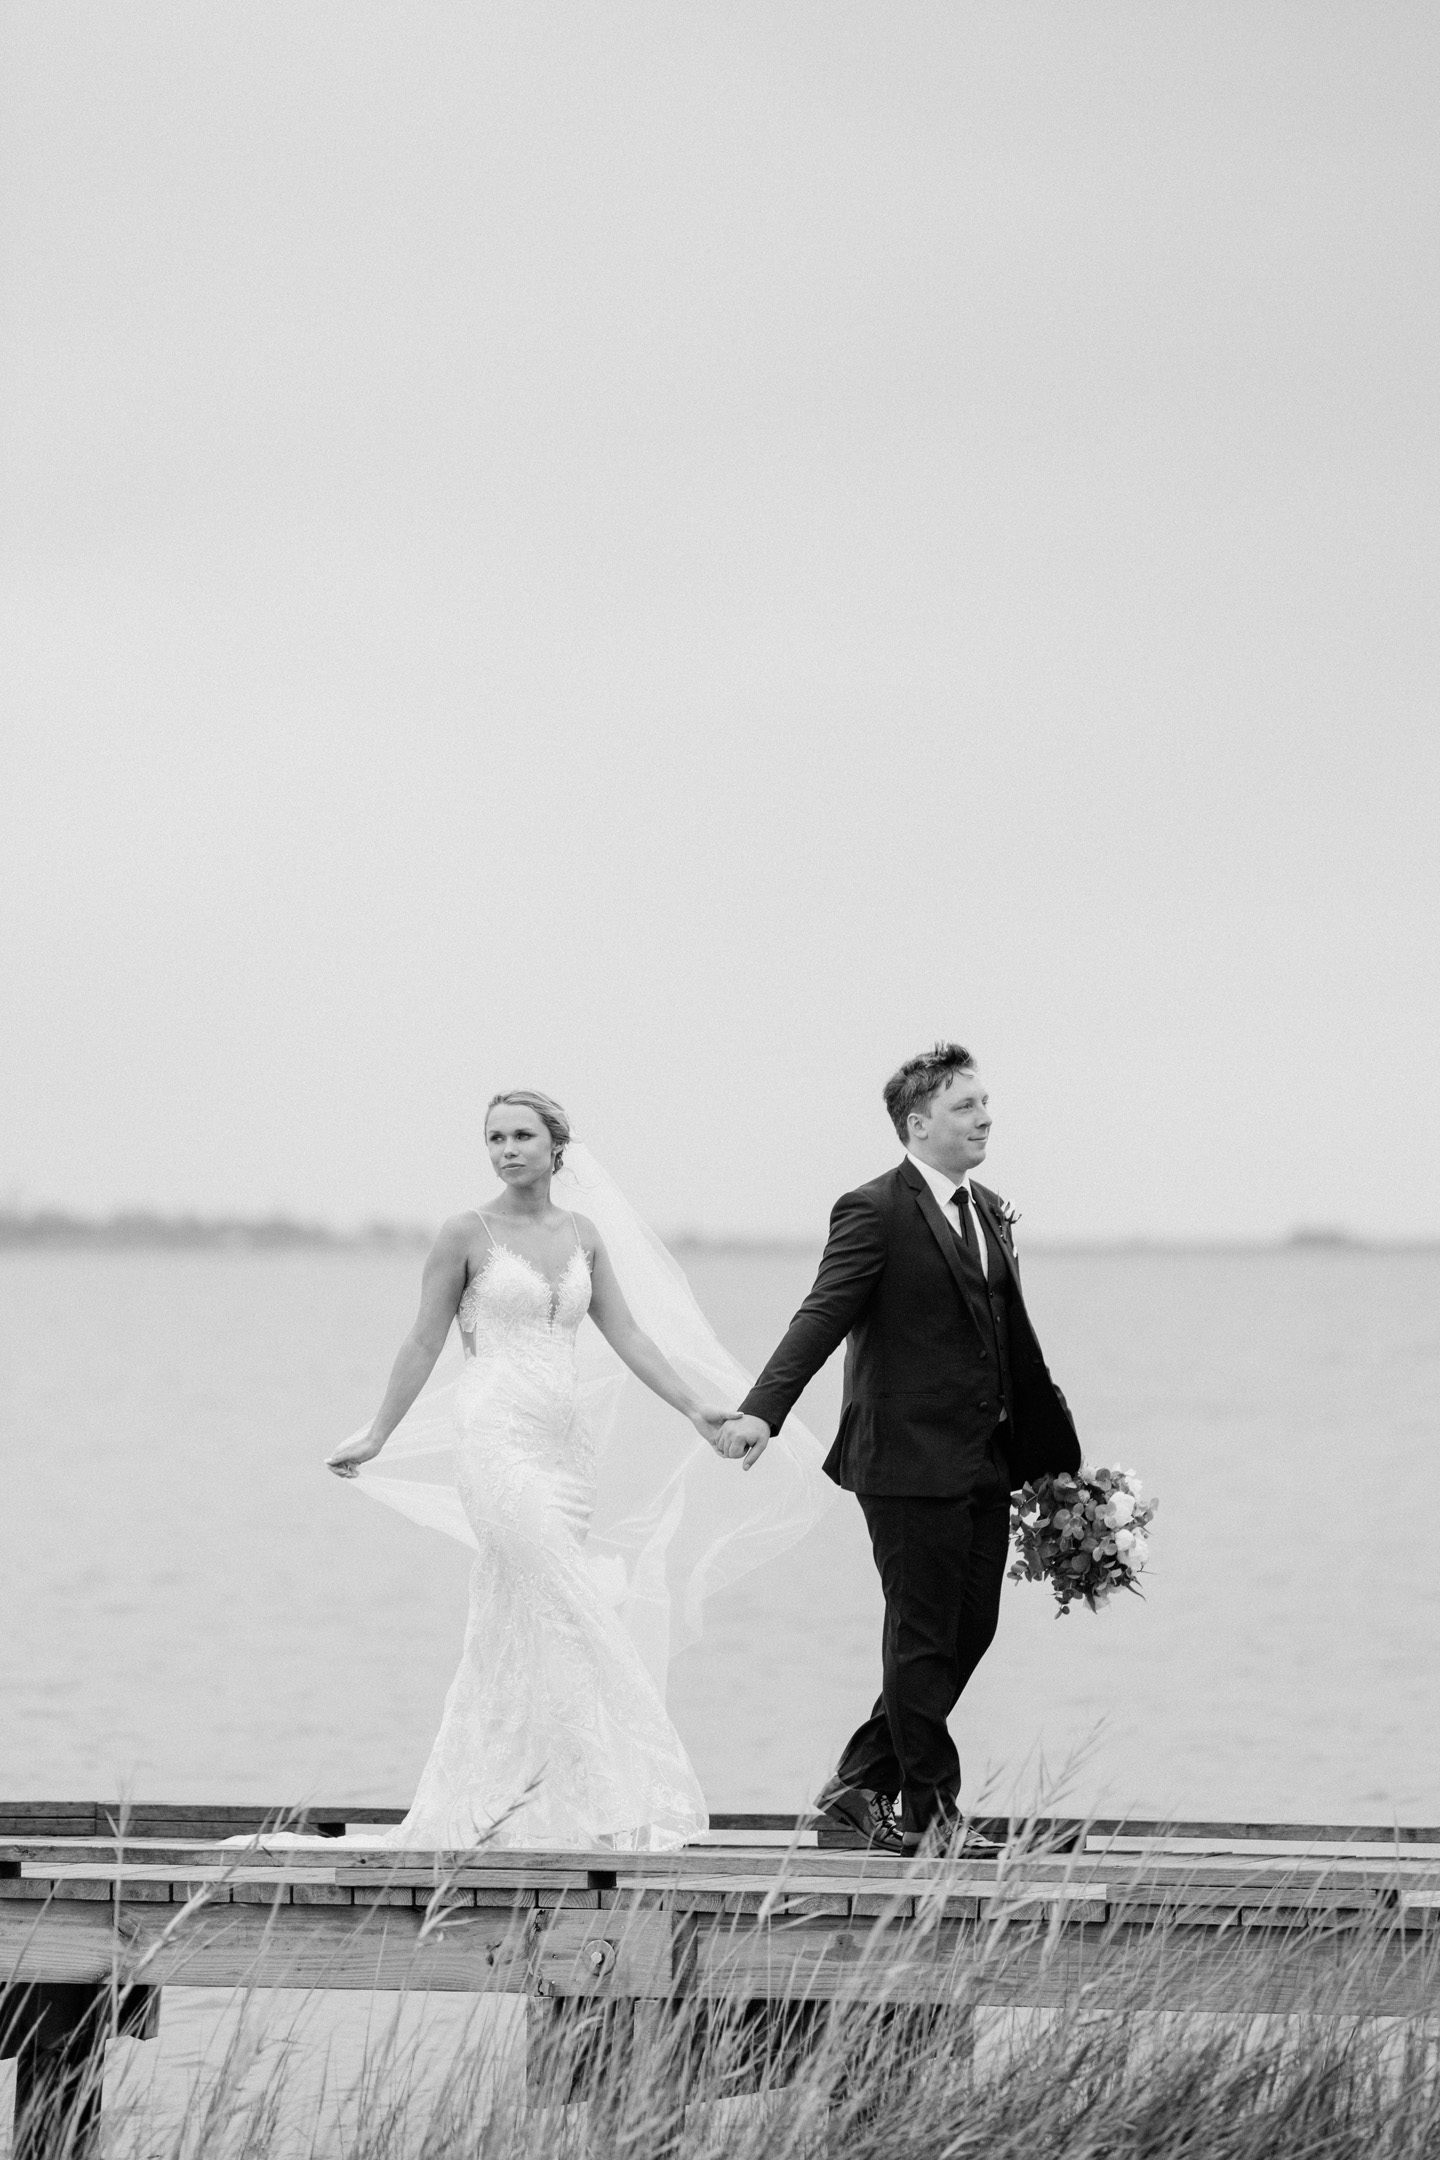 Bride and groom walking together on the dock at Festival Park